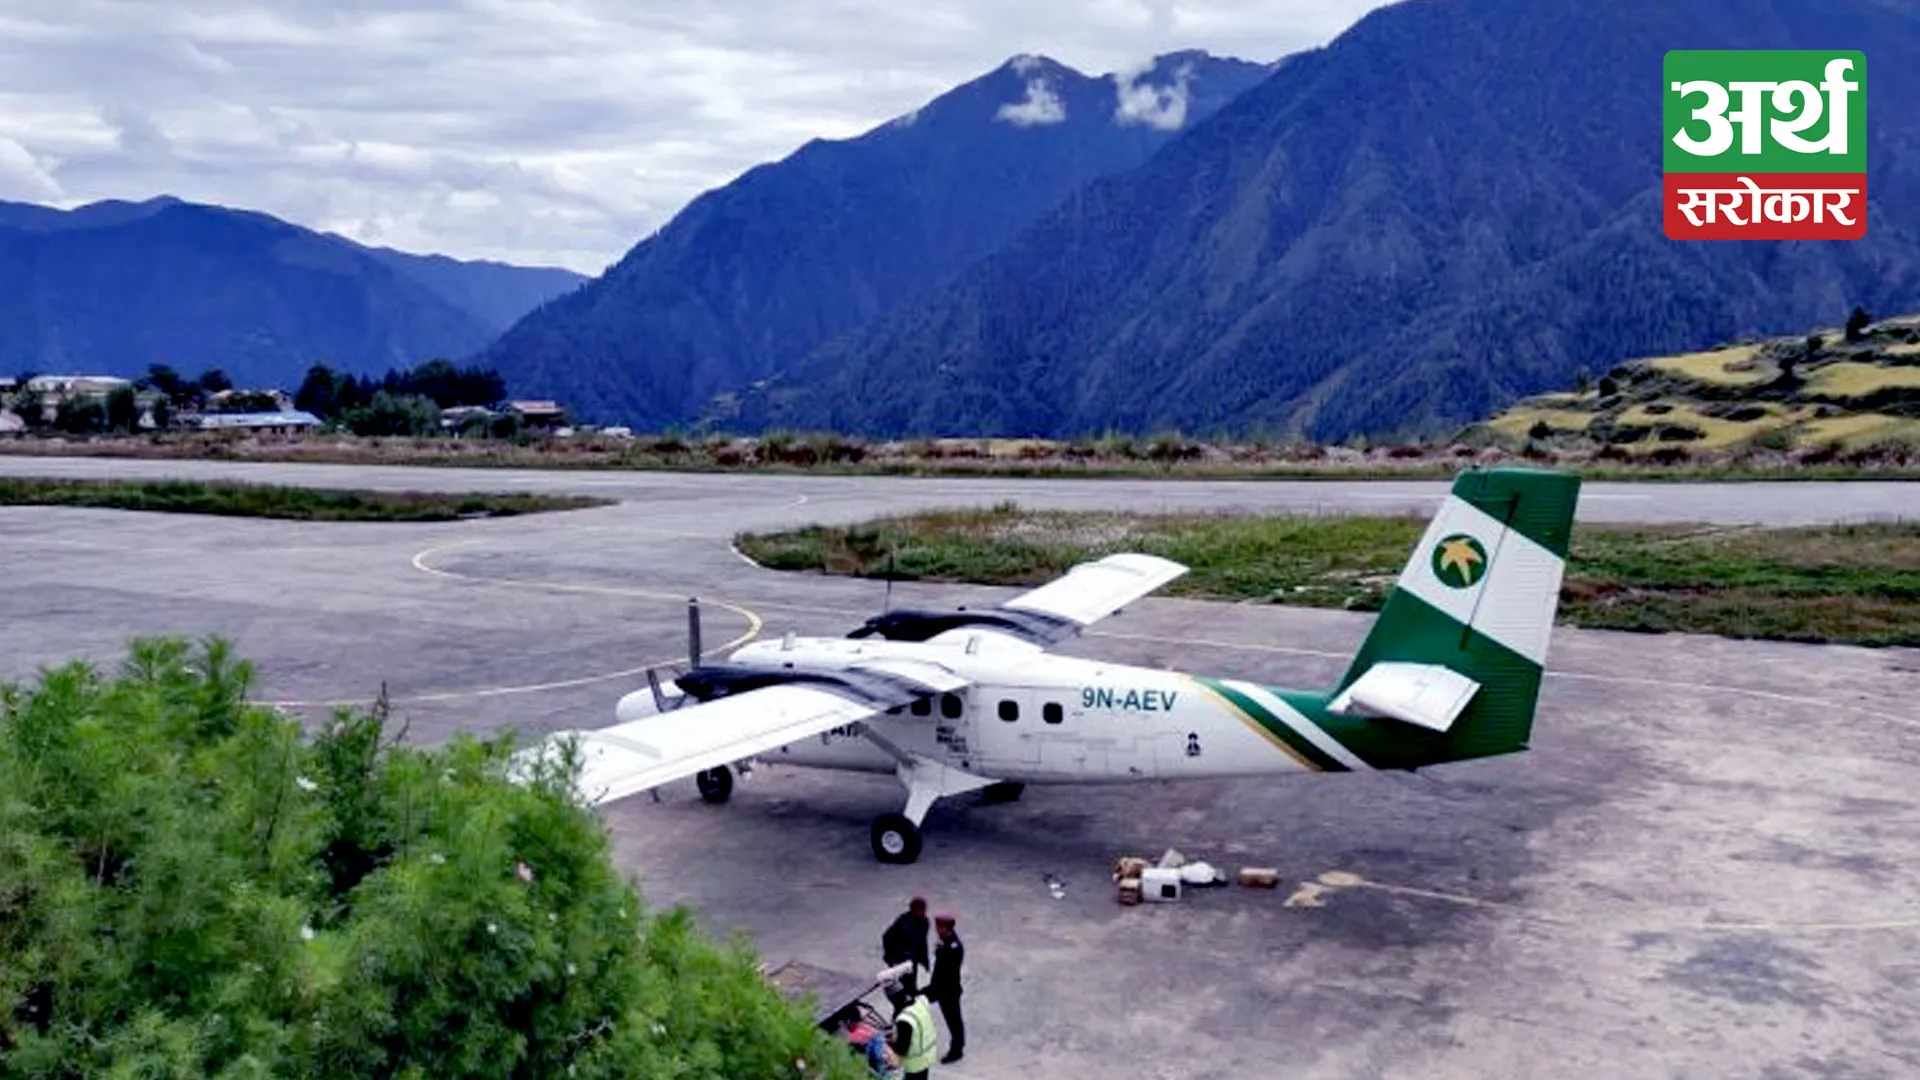 Flights disrupted in Karnali since two days